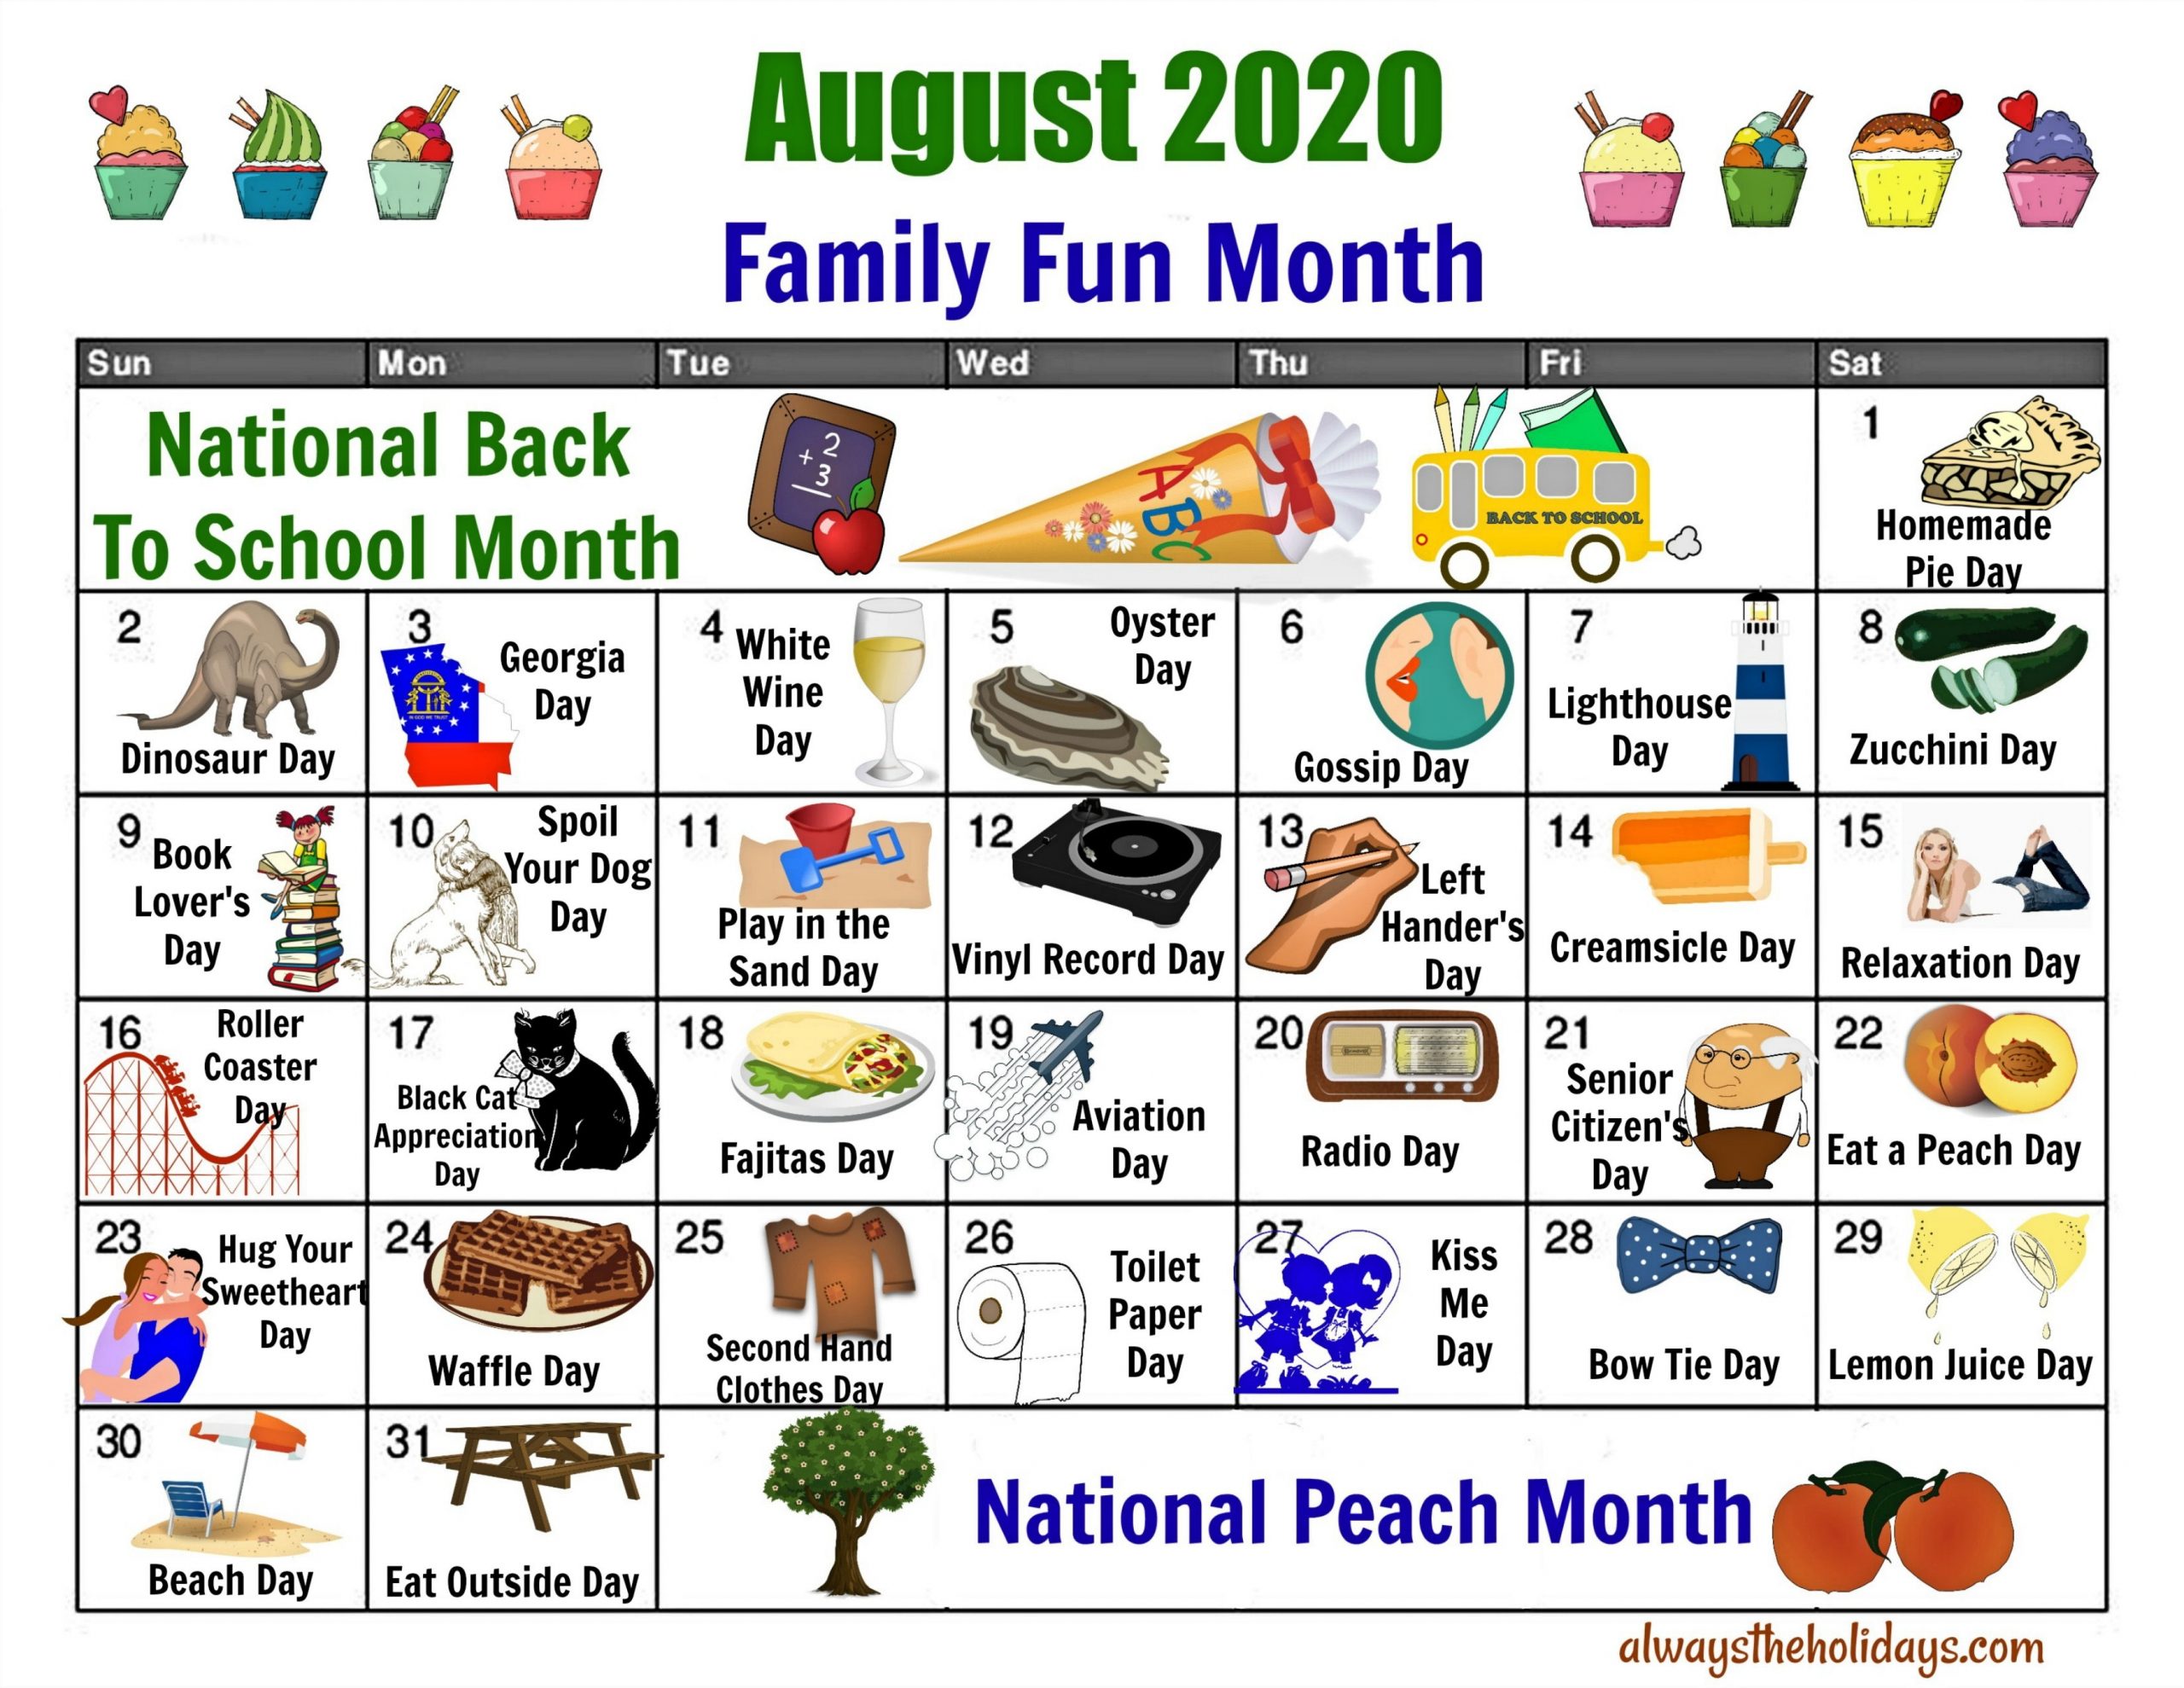 August National Day Calendar - Free Printable Of National Days